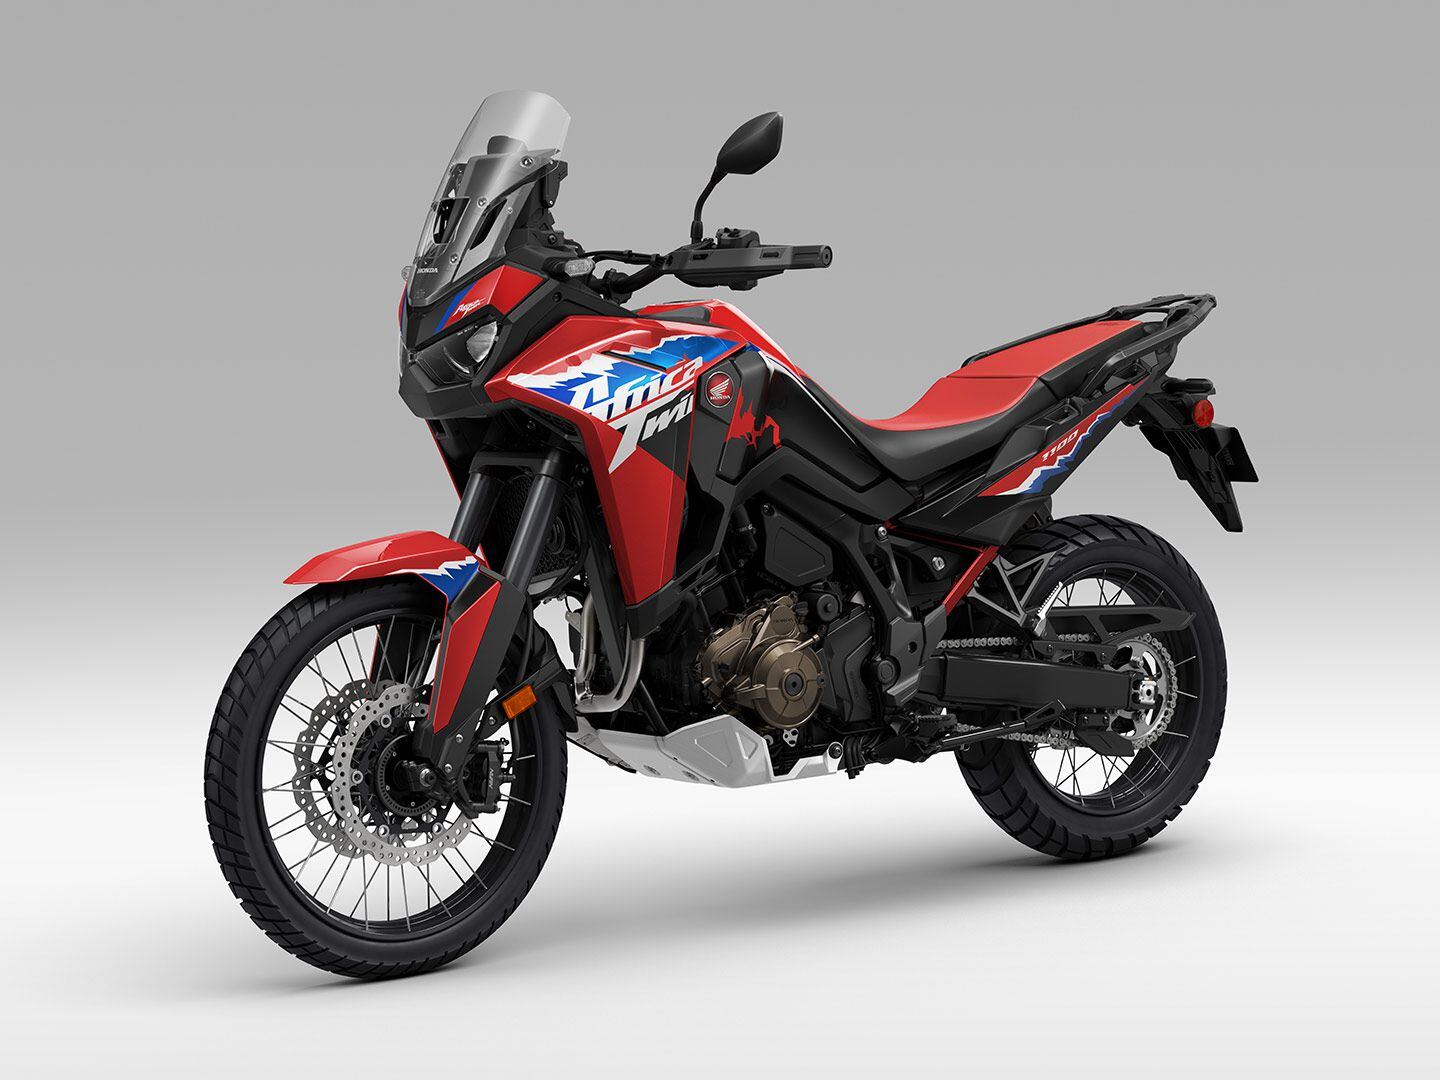 The Africa Twin DCT will price at $15,599.